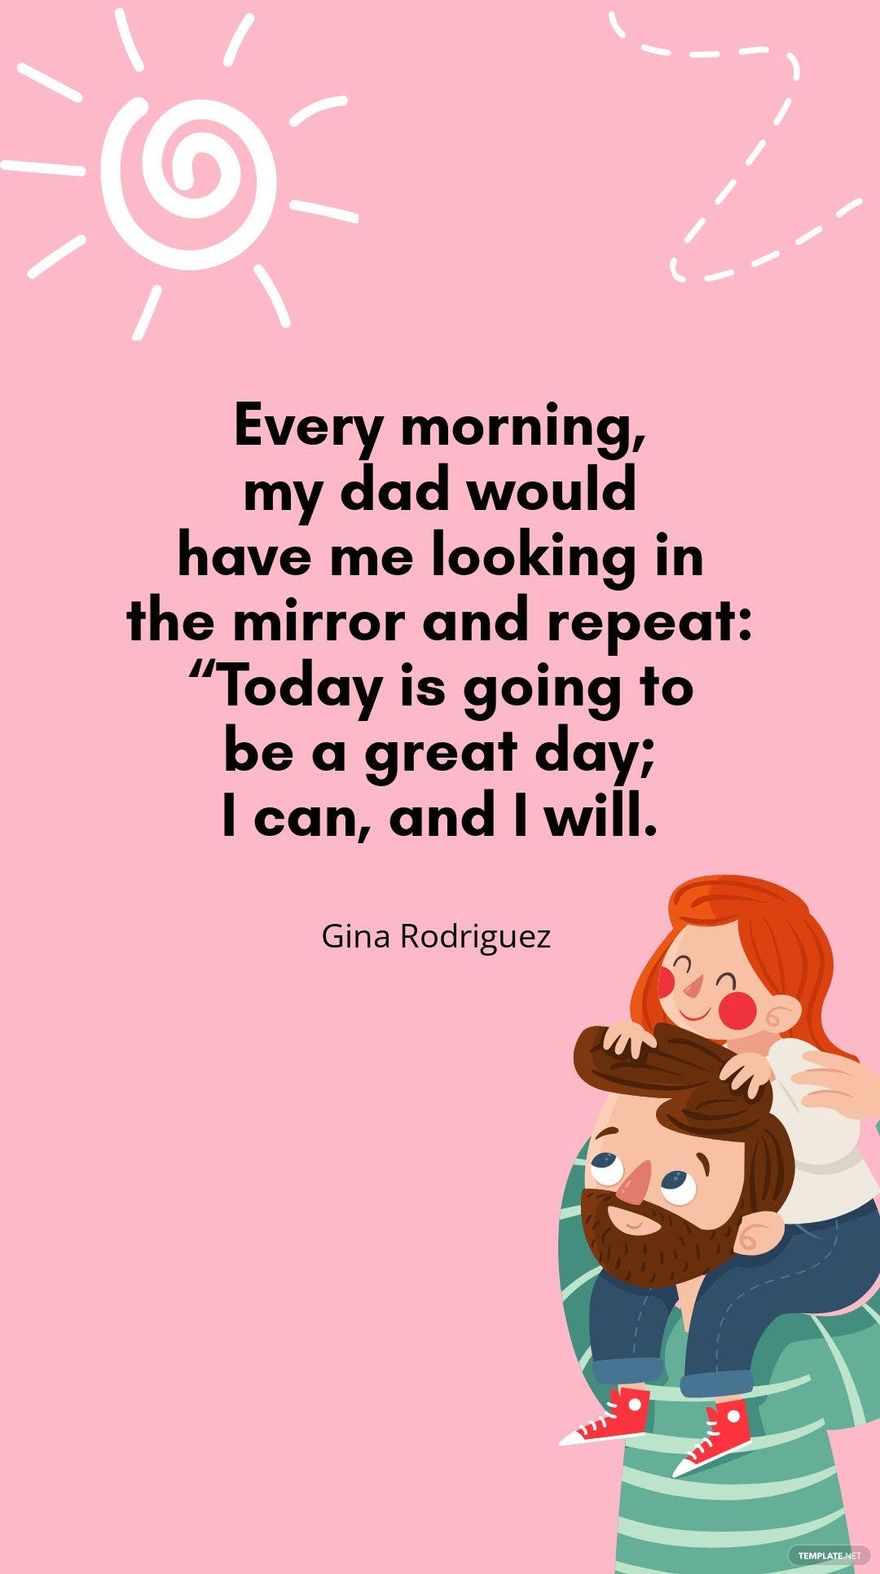 Gina Rodriguez - Every morning, my dad would have me looking in the mirror and repeat: “Today is going to be a great day; I can, and I will.